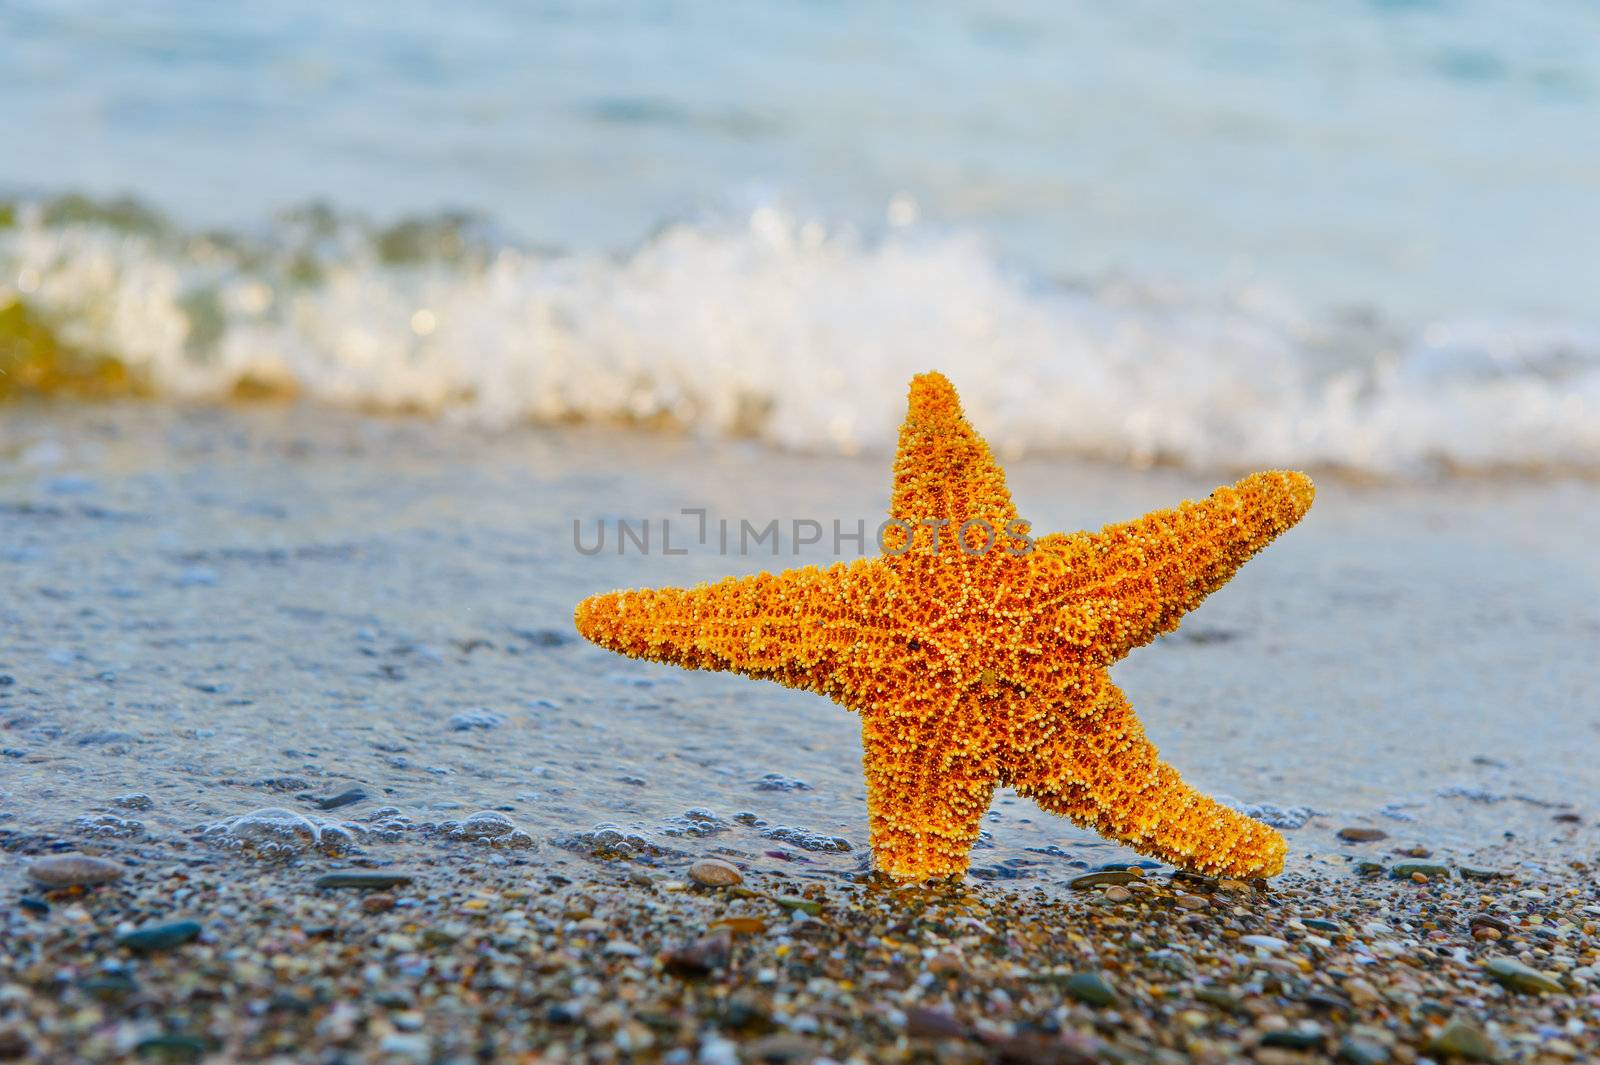 Starfish ashore. Waves on a background